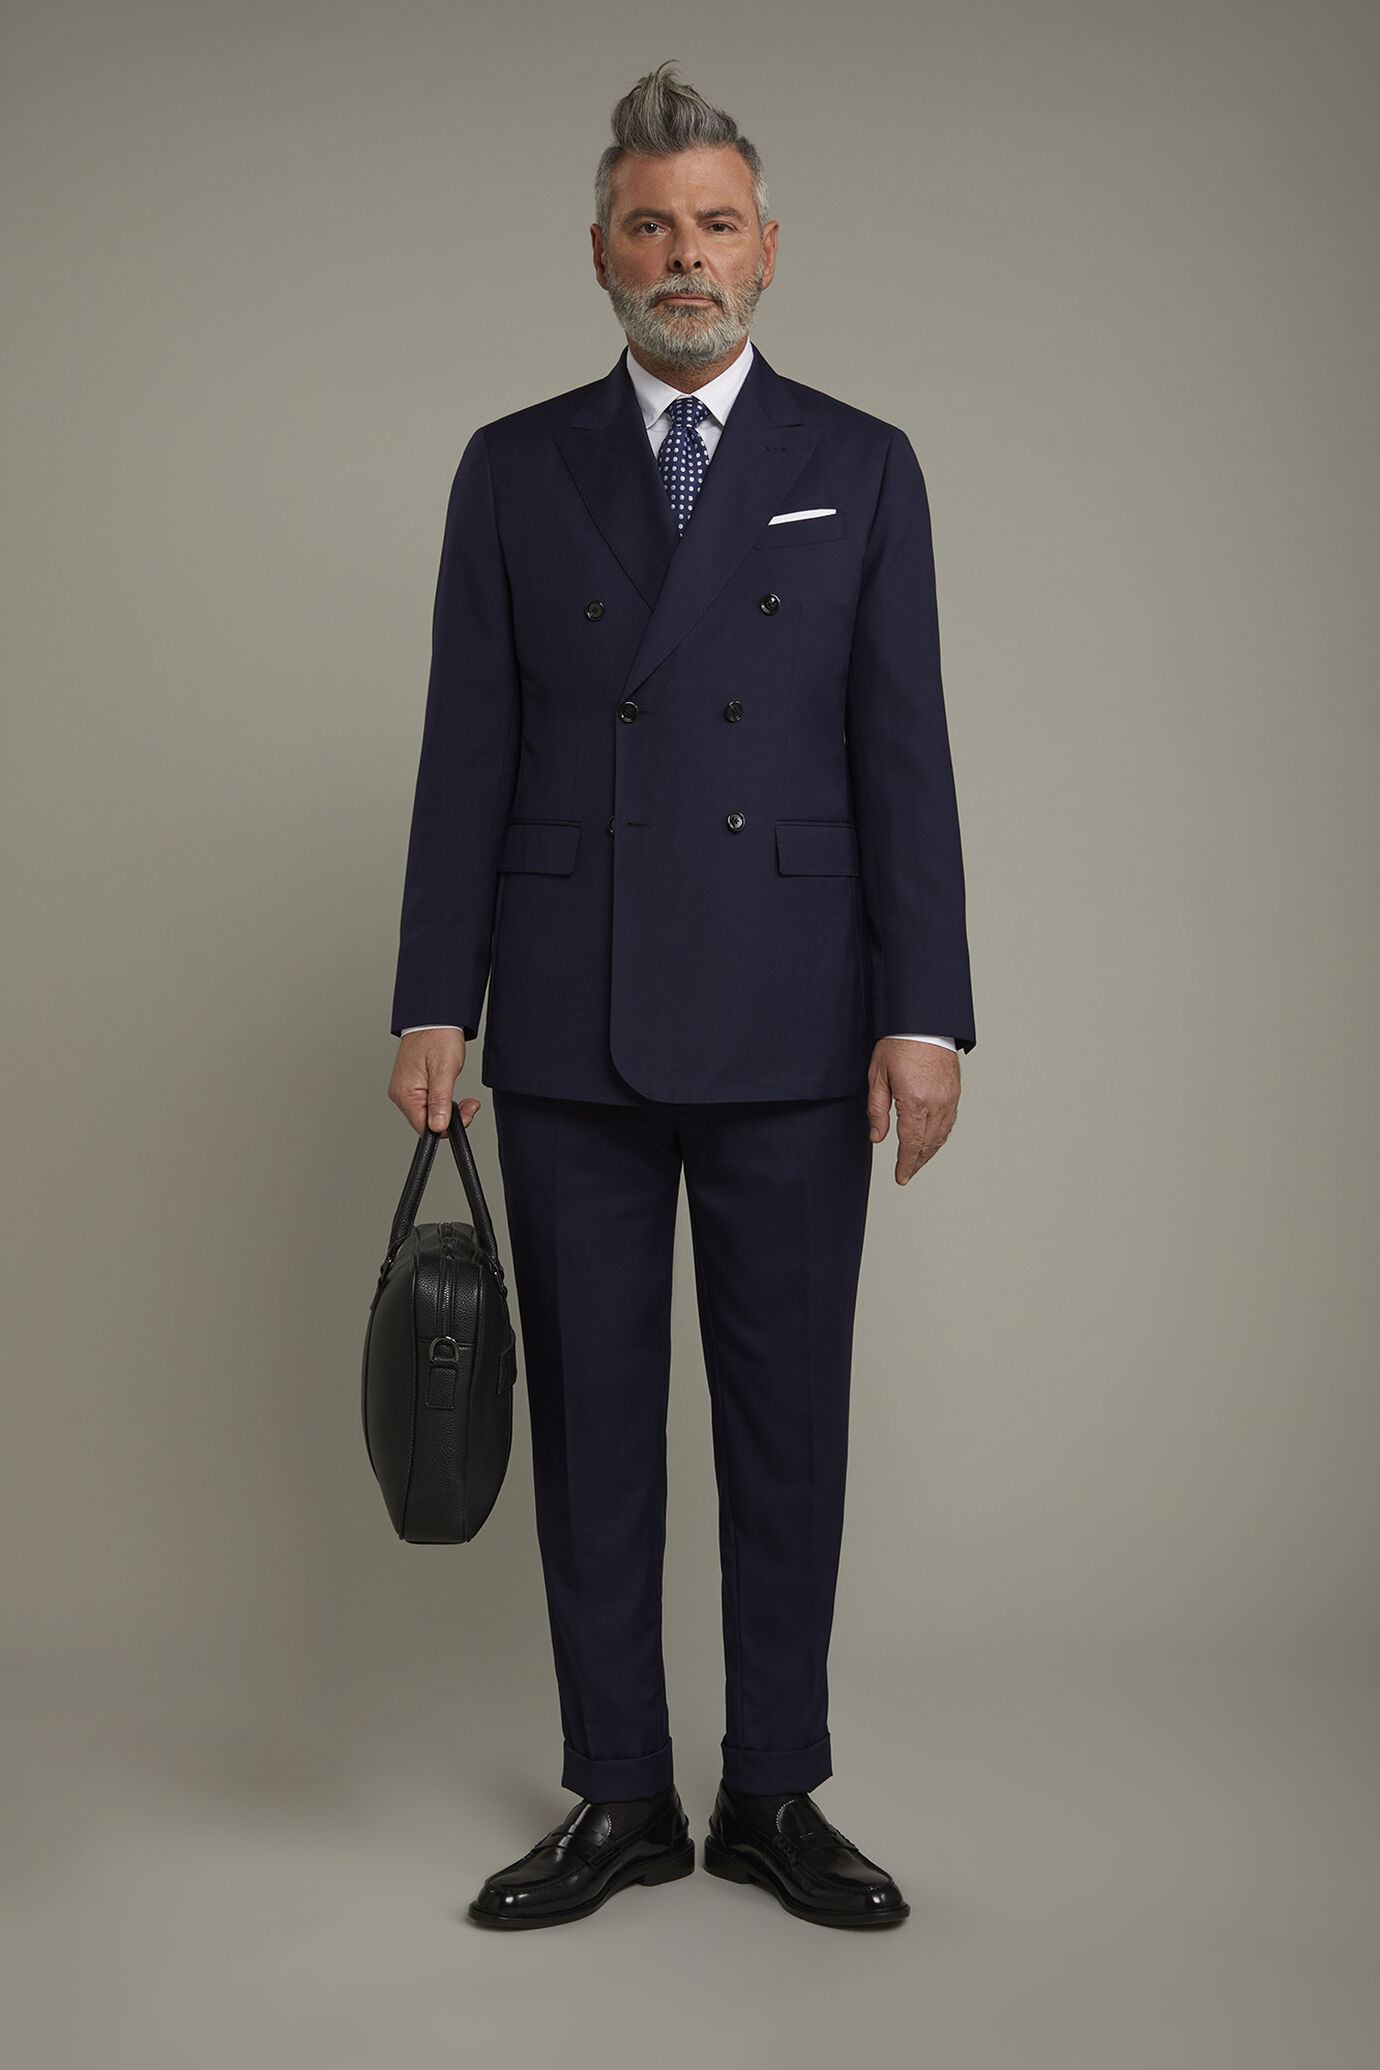 Men's double-breasted Wool Blend suit with classic single-breasted trousers and unlined double-breasted jacket with regular fit lance lapels